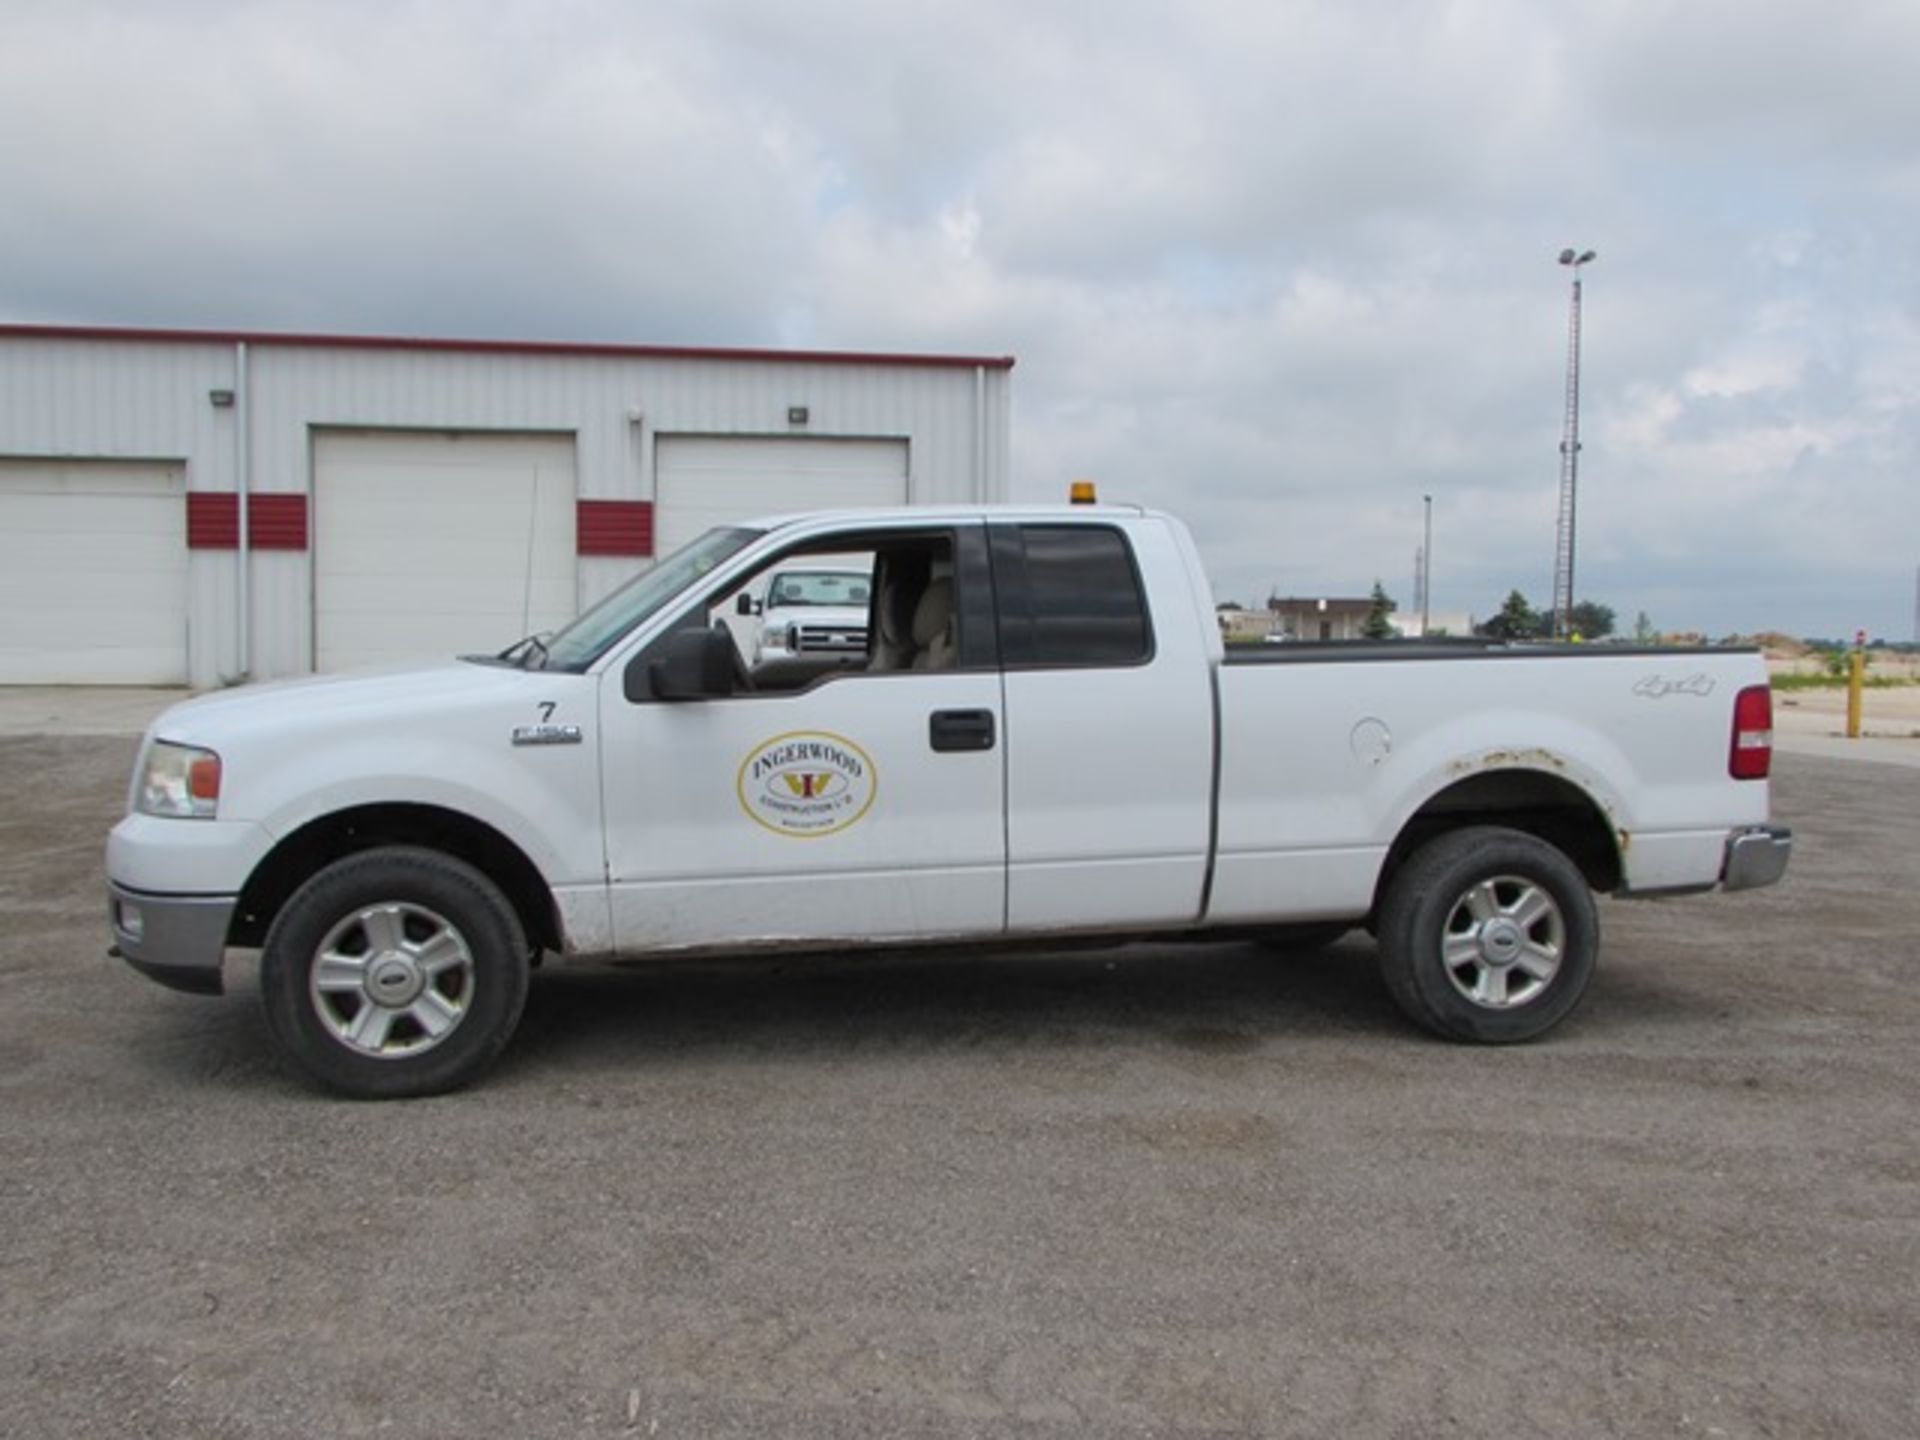 2004 Ford "F-150 XLT" white pick up truck c/w 4X4 traction, 5.4 Triton motor, extended cab VIN #